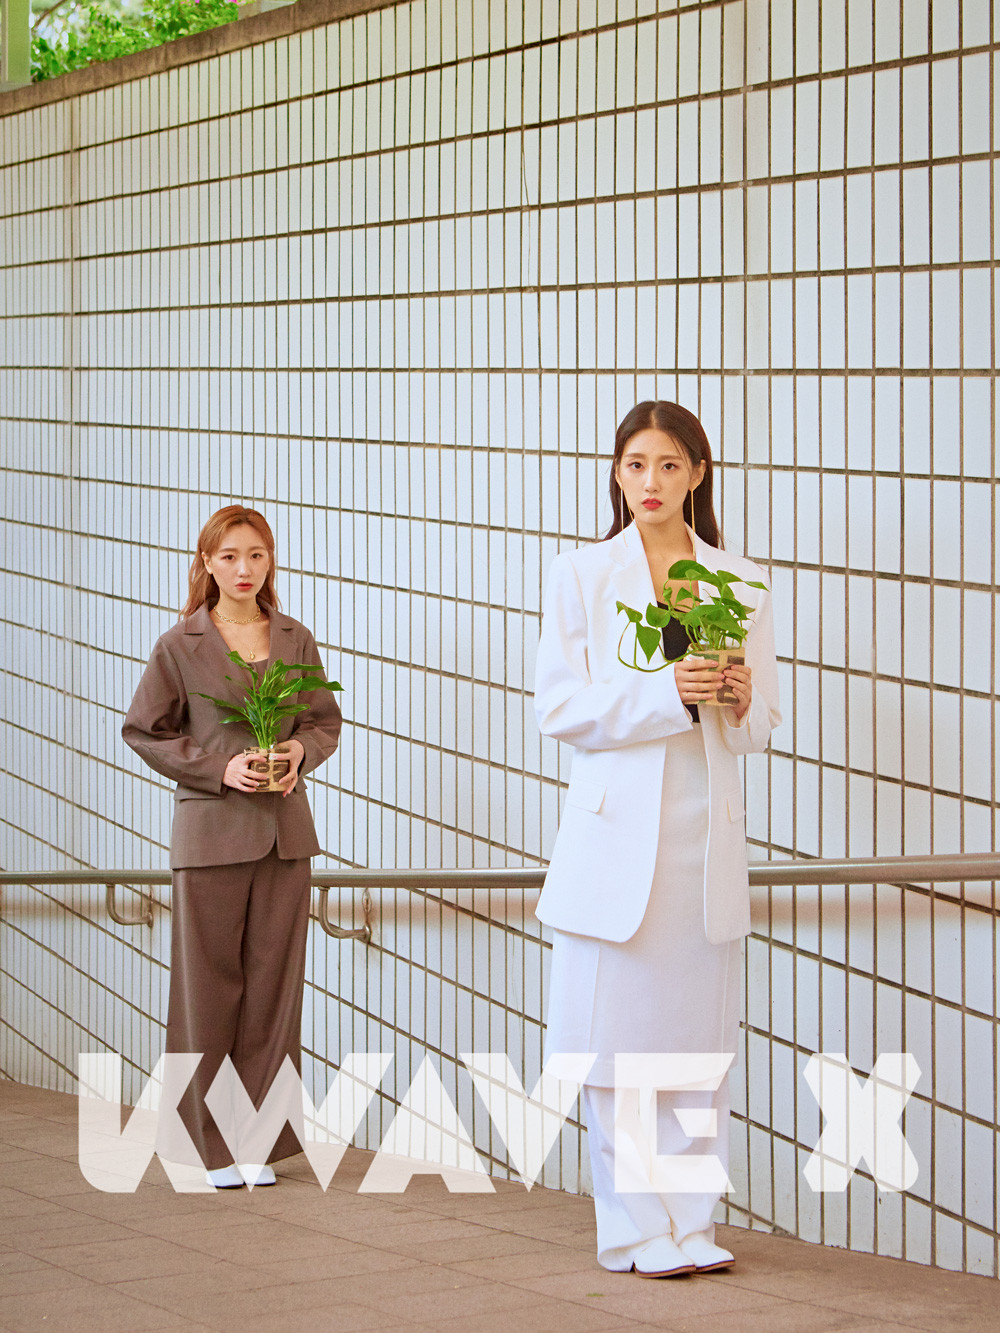 lovelyz-ryu-soo-jung-jeong-ye-in-stay-home-in-pictorial-with-kwave-x-2